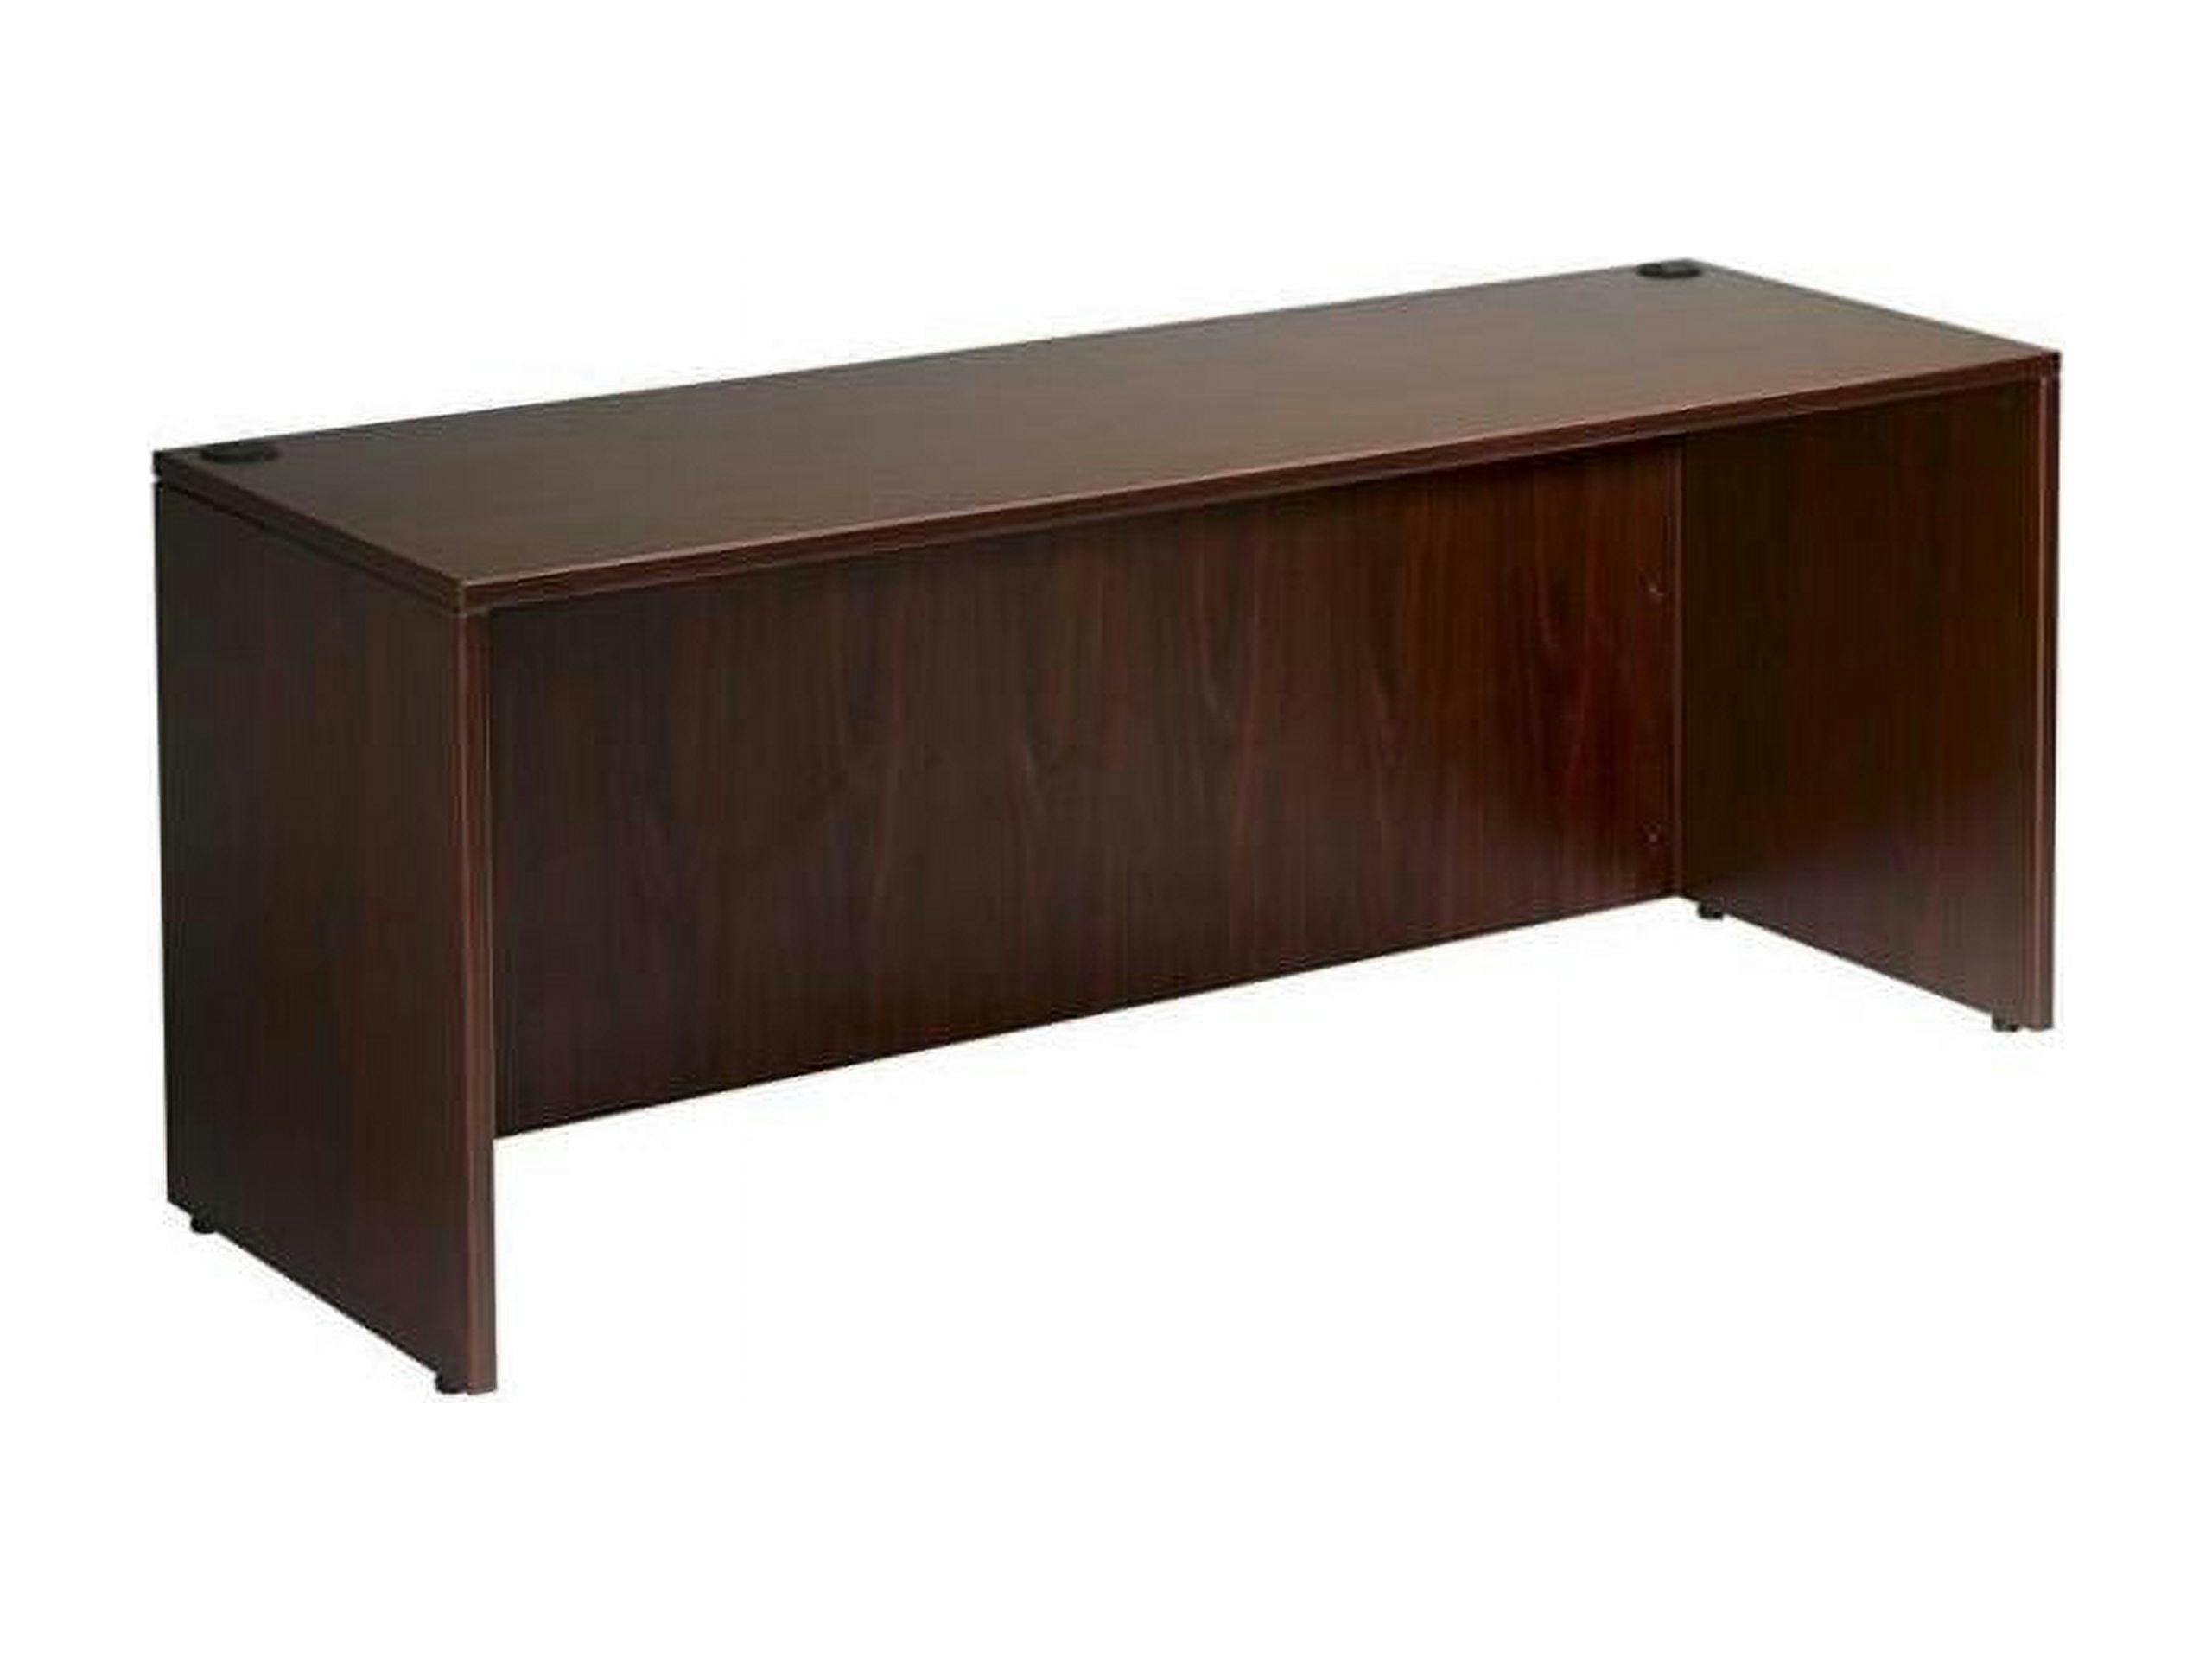 Executive Mahogany Laminate Desk with Wire Management